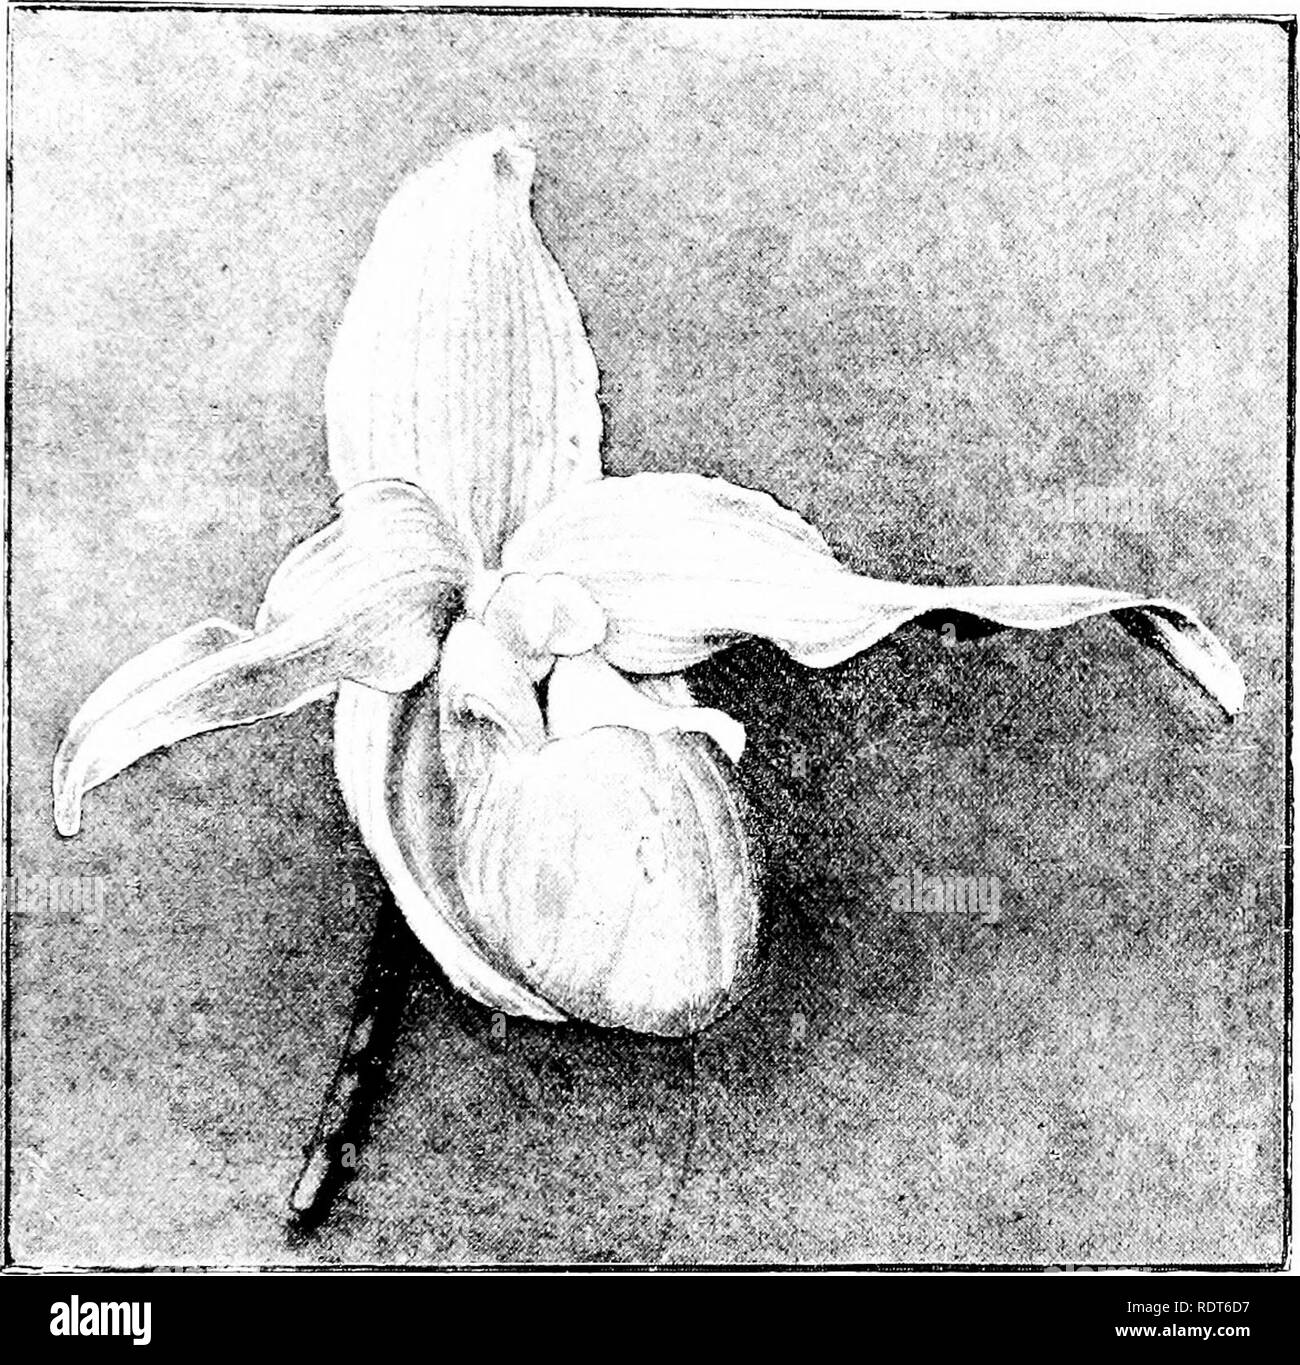 . The orchid stud-book: an enumeration of hybrid orchids of artificial origin, with their parents, raisers, date of first flowering, references to descriptions and figures, and synonymy. With an historical introduction and 120 figures and a chapter on hybridising and raising orchids from seed. Orchids. Part II. THE ORCHID STUD-BOOK. 231 28. P. x Schrcederae (caudatum ? x Sedenii), O.K. 1898, 361, f. 17.— Veitch, 1S83. [gee Fig 89 C. x Schrcederaa, G.C. 1SS3, i. 432; O.A. v. t. 196; Lmd. ii. t. 69 (v. splendens); V. Man. O. iv. 105, f., J.H. 1890, i. 405, f. 60 ; G. World, 1890, 200, f. S. x Sc Stock Photo